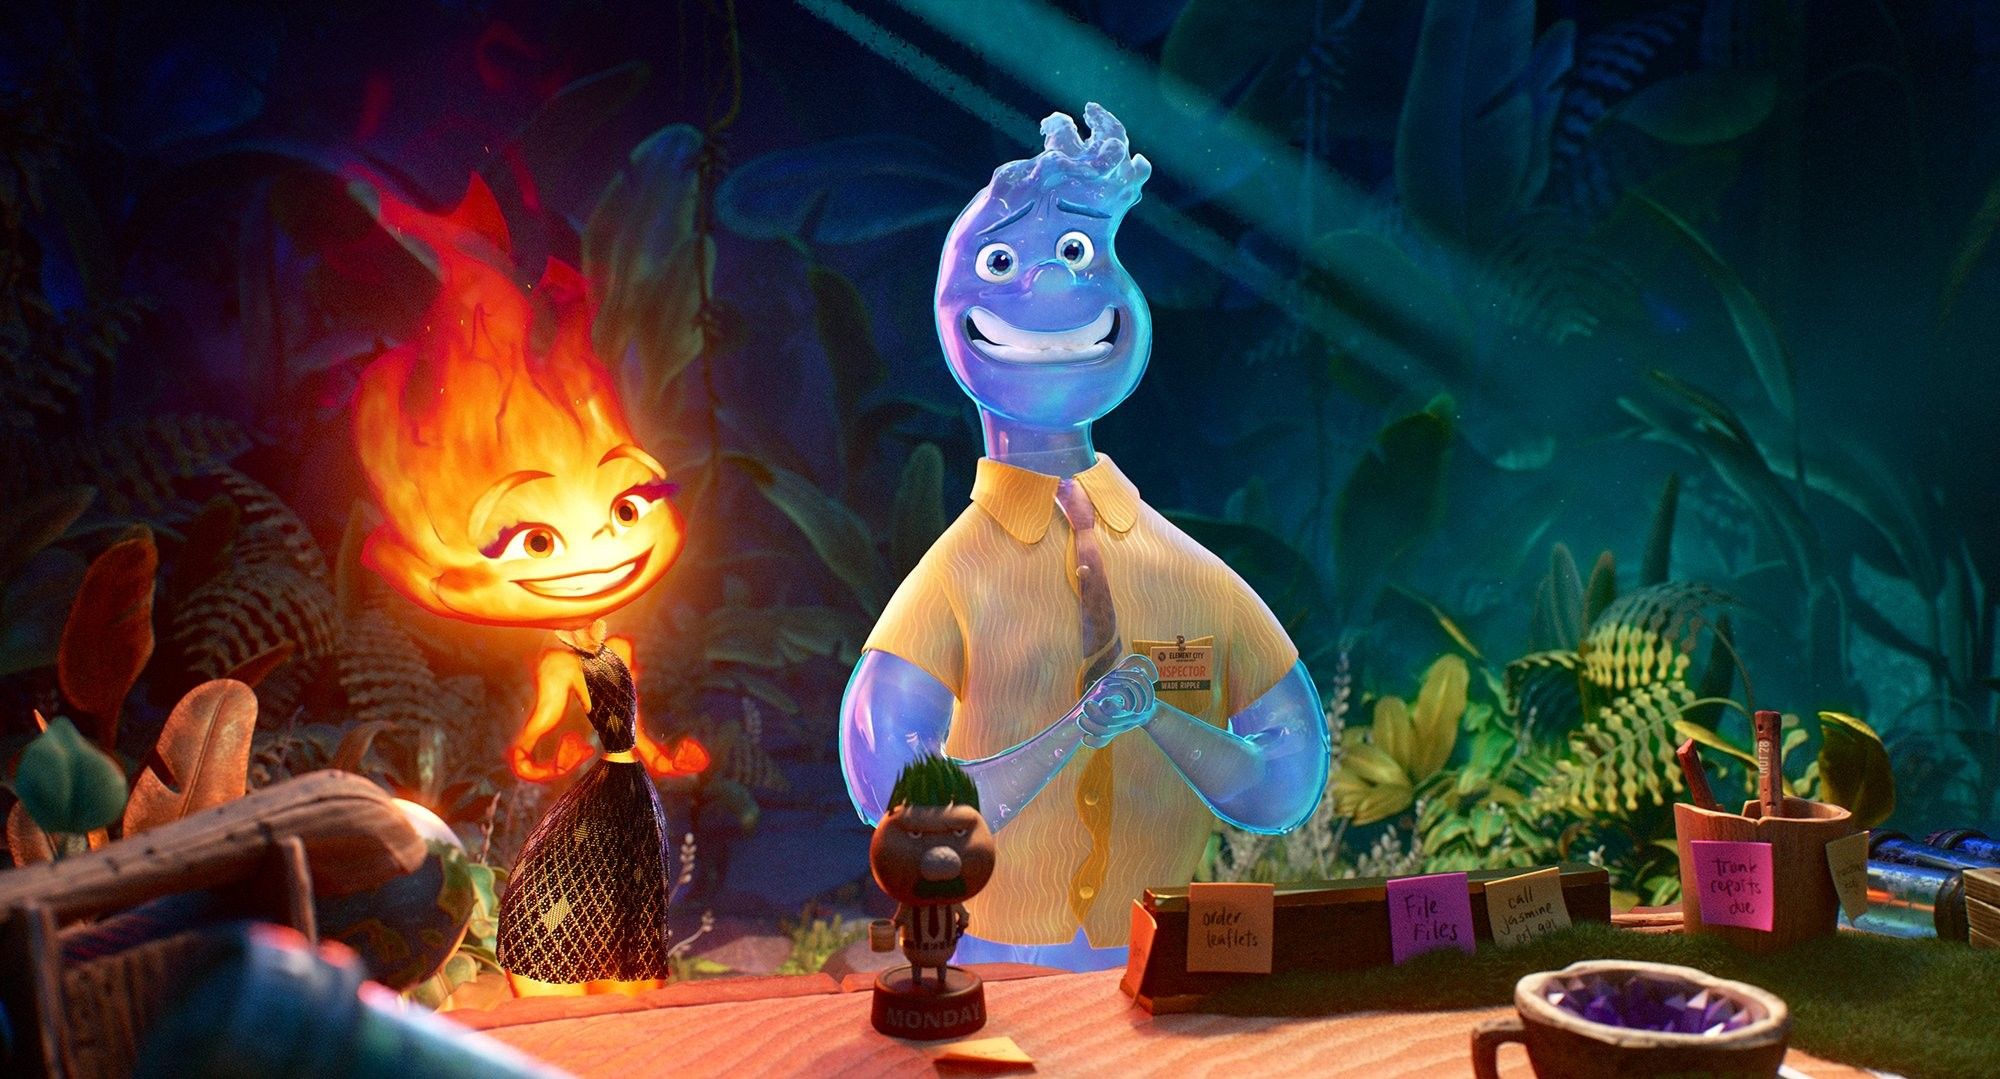 Elemental Is Repeating Pixar’s Best Inside Out Trick